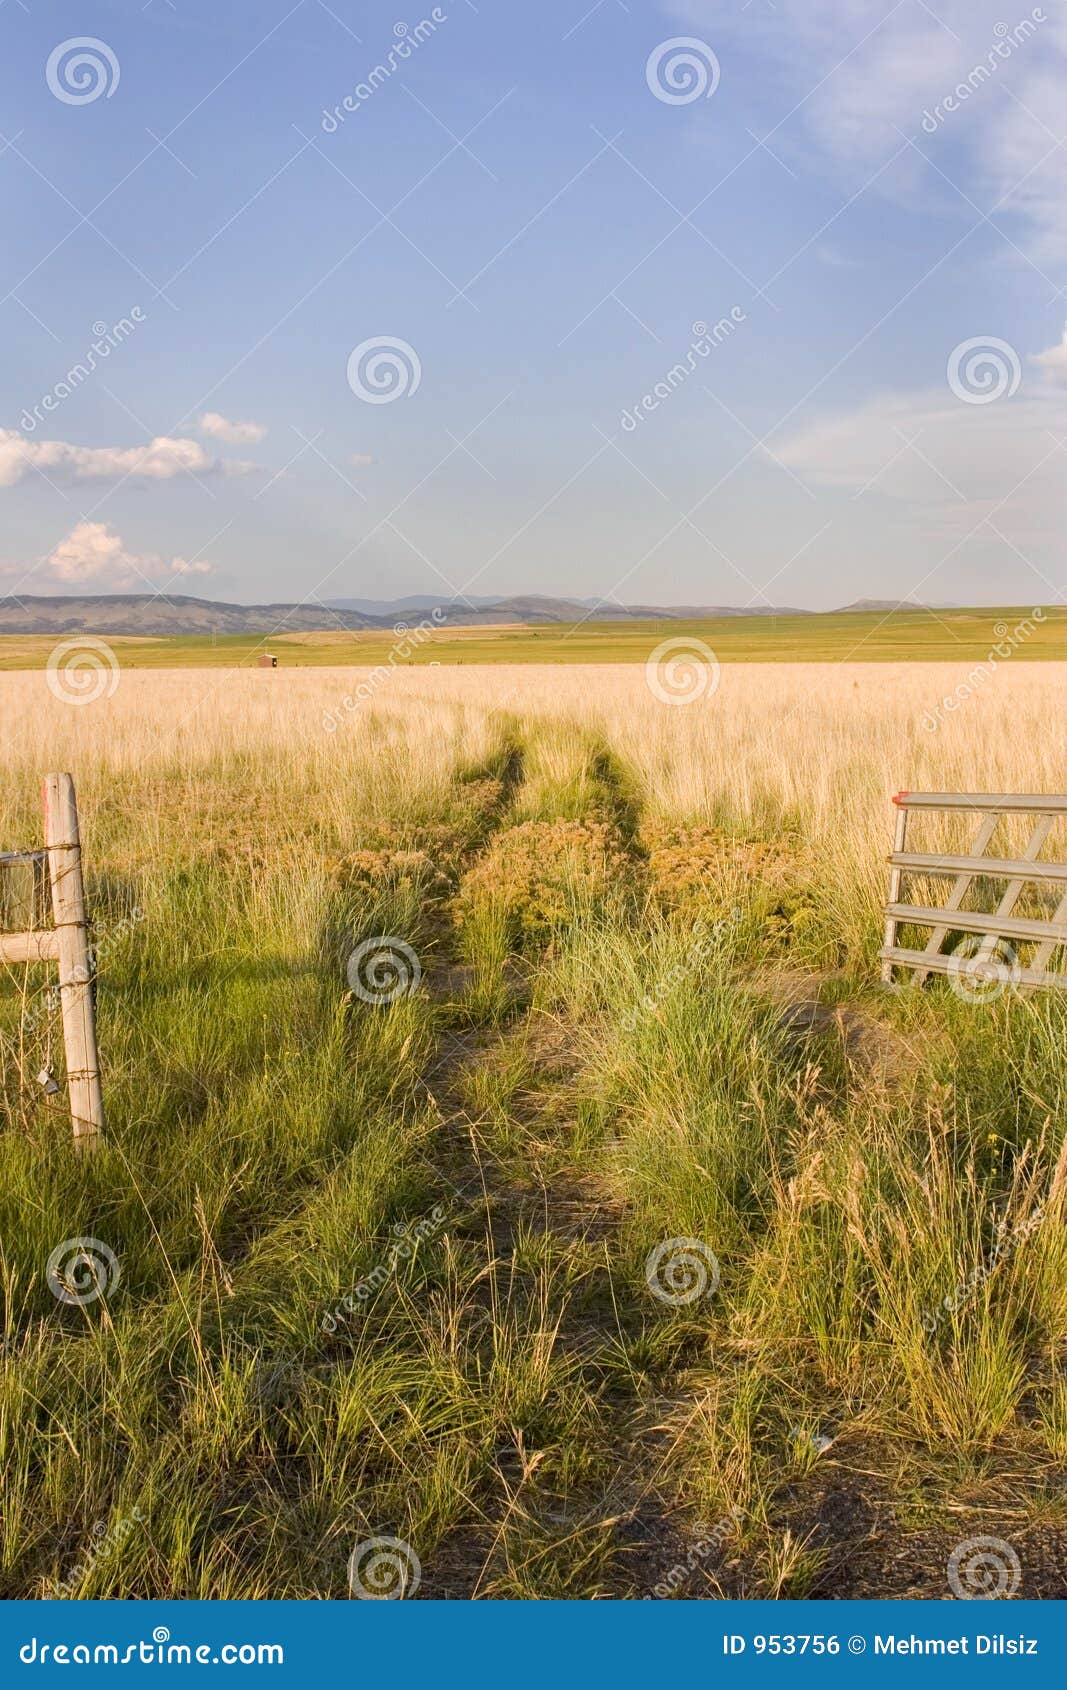 Open Gate To A Field With Clear Skies And A Small Shed 